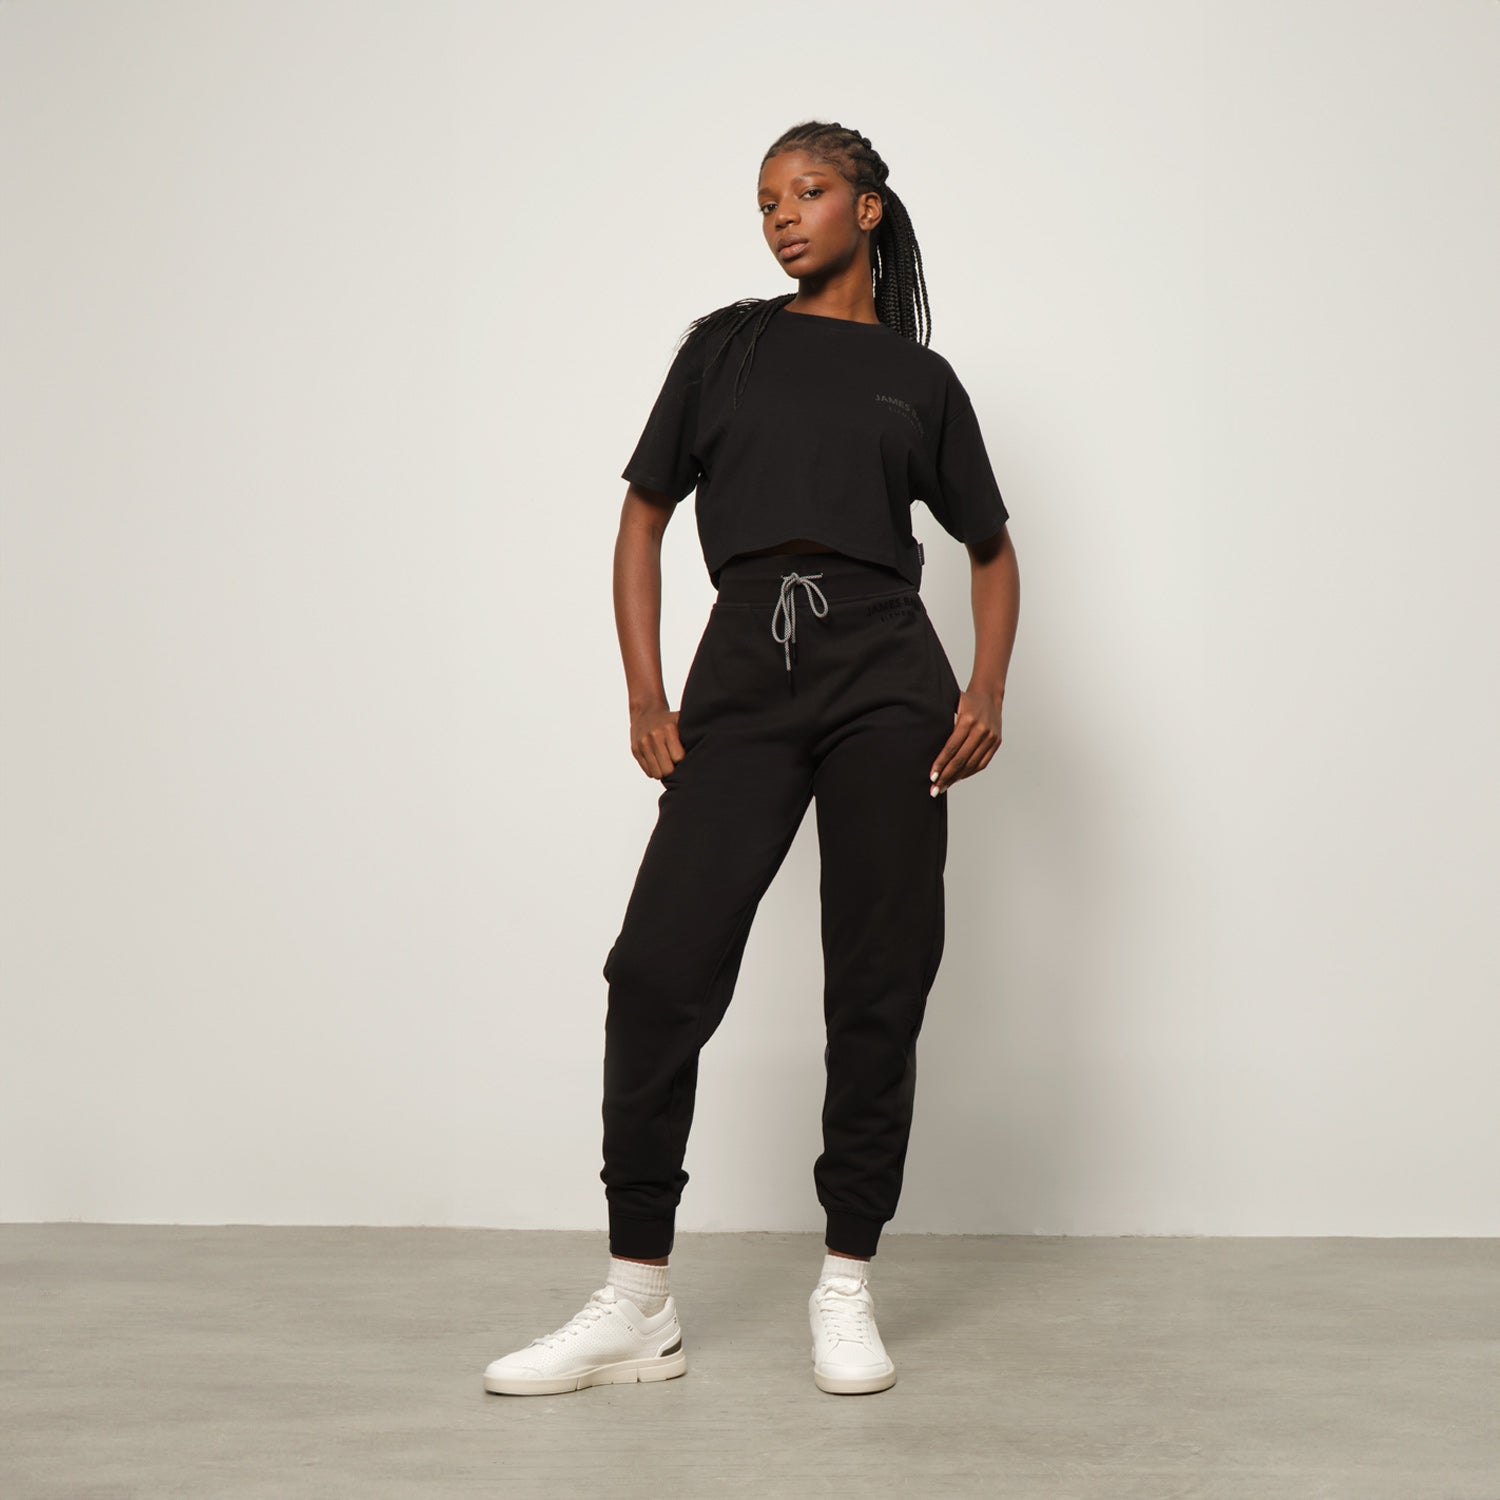 Women's Relaxed Fit Crop Top - JAMES BARK